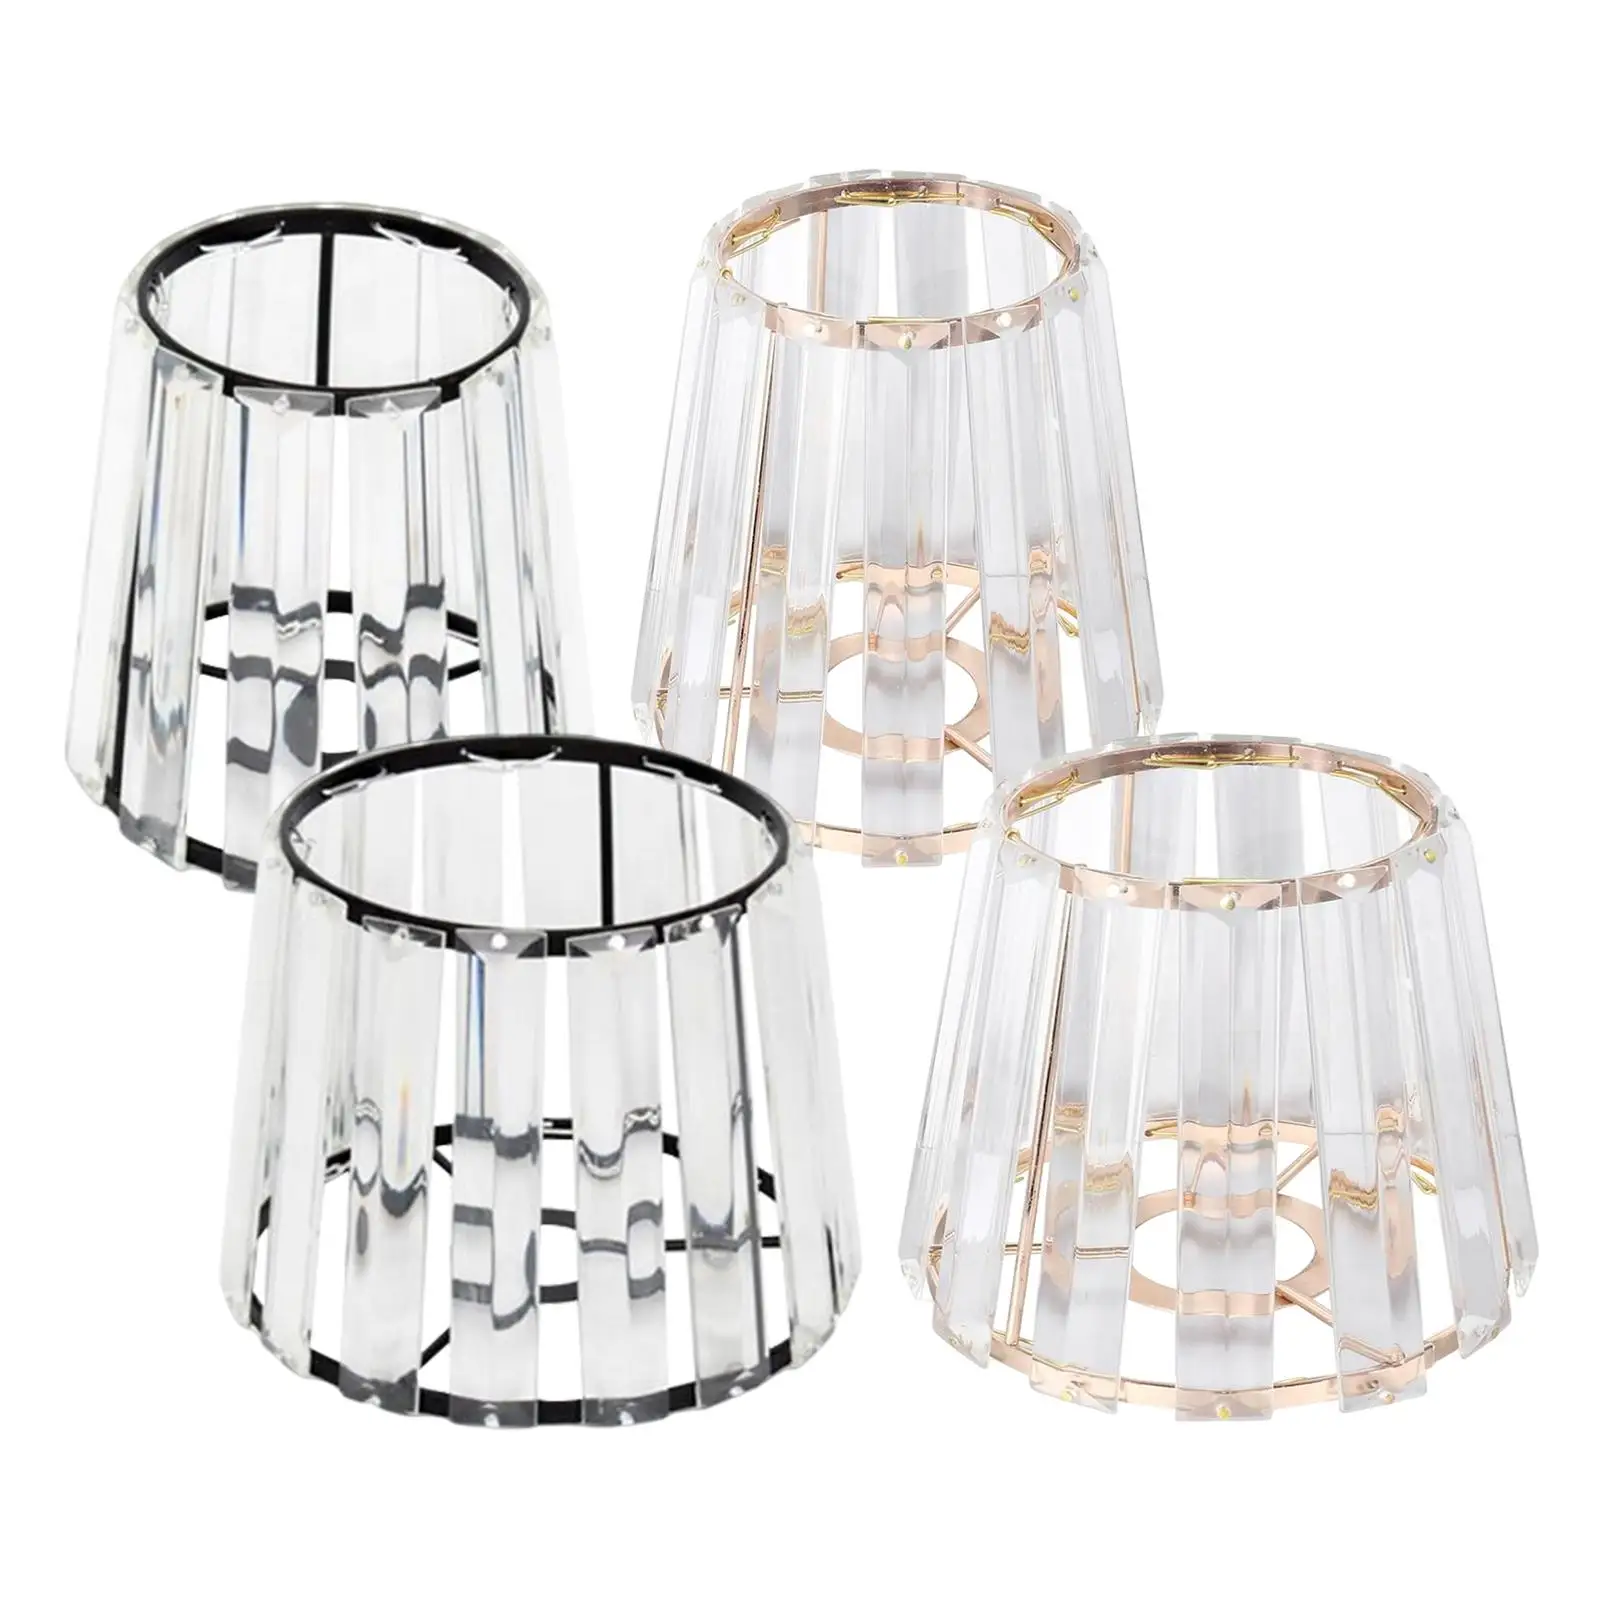 Exquisite Lamp Shade Chandelier Table Lamp Shades Decorative Lamp Cover